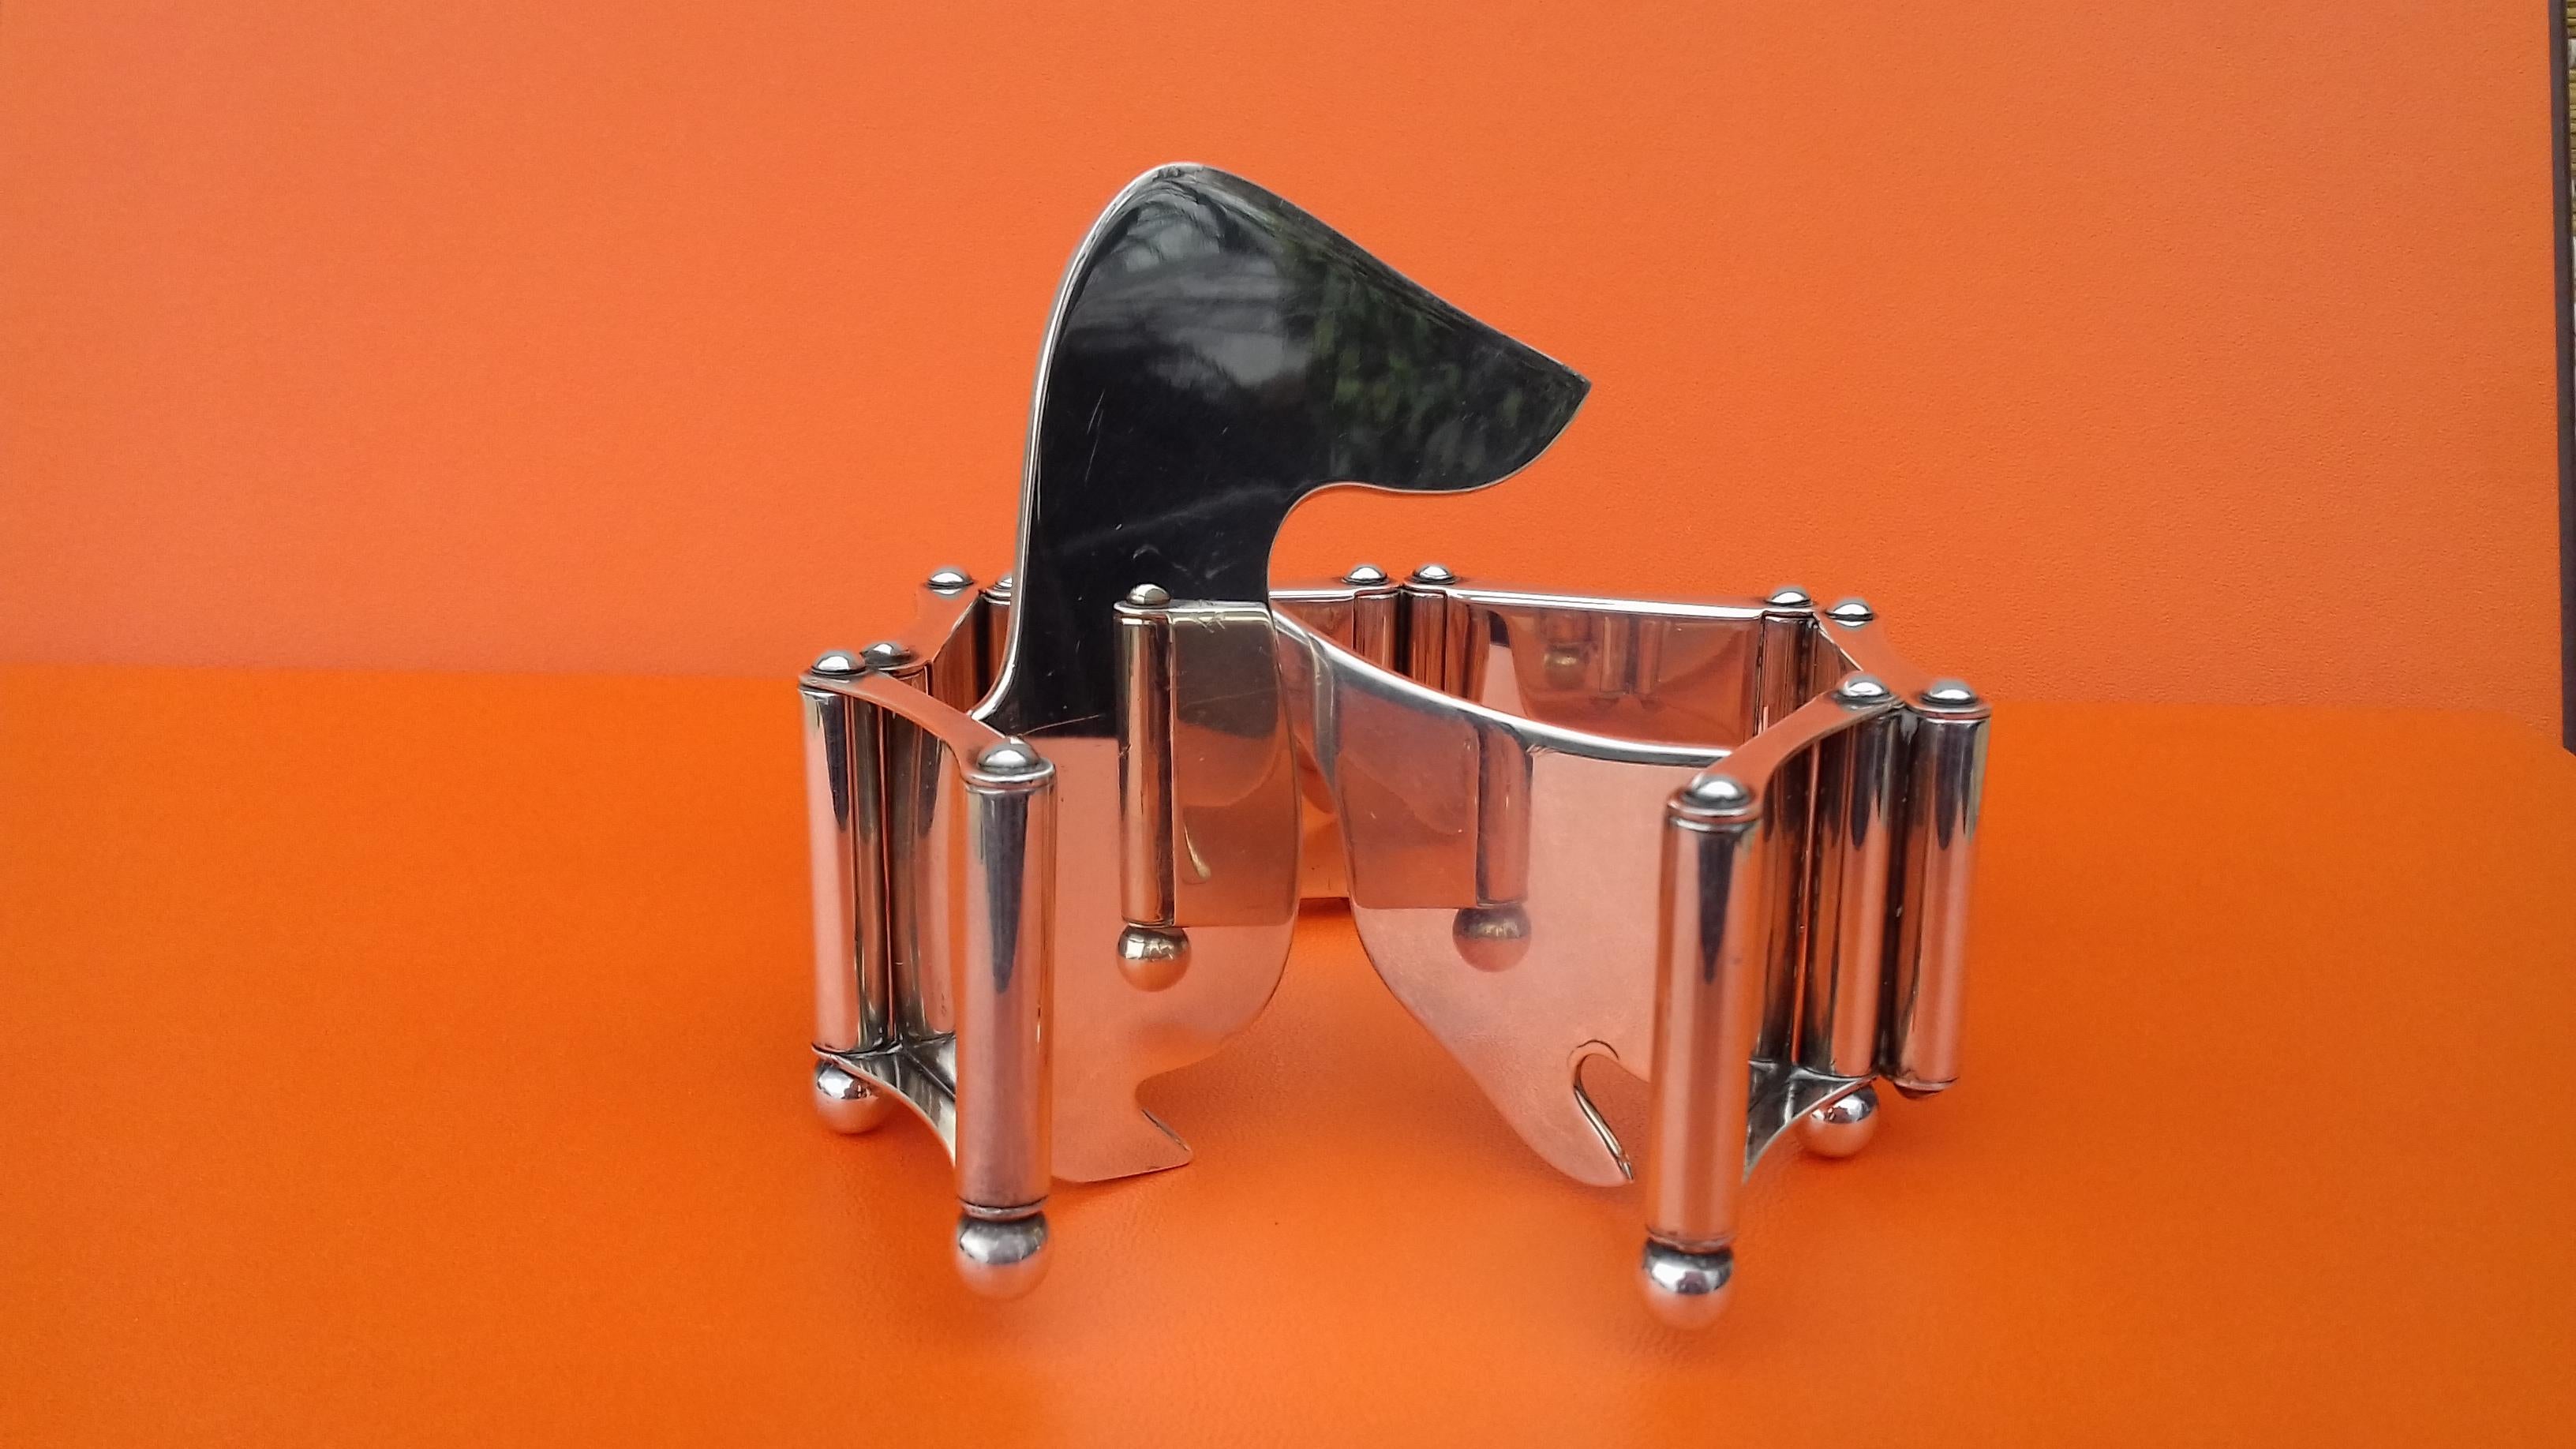 Exceptional Authentic Hermès Photos Holder

Absolutely stunning, a rare collector item

Dachshund shaped, the body is made up of 6 small articulated photos frames

Made in France

Made of Silver Plate

